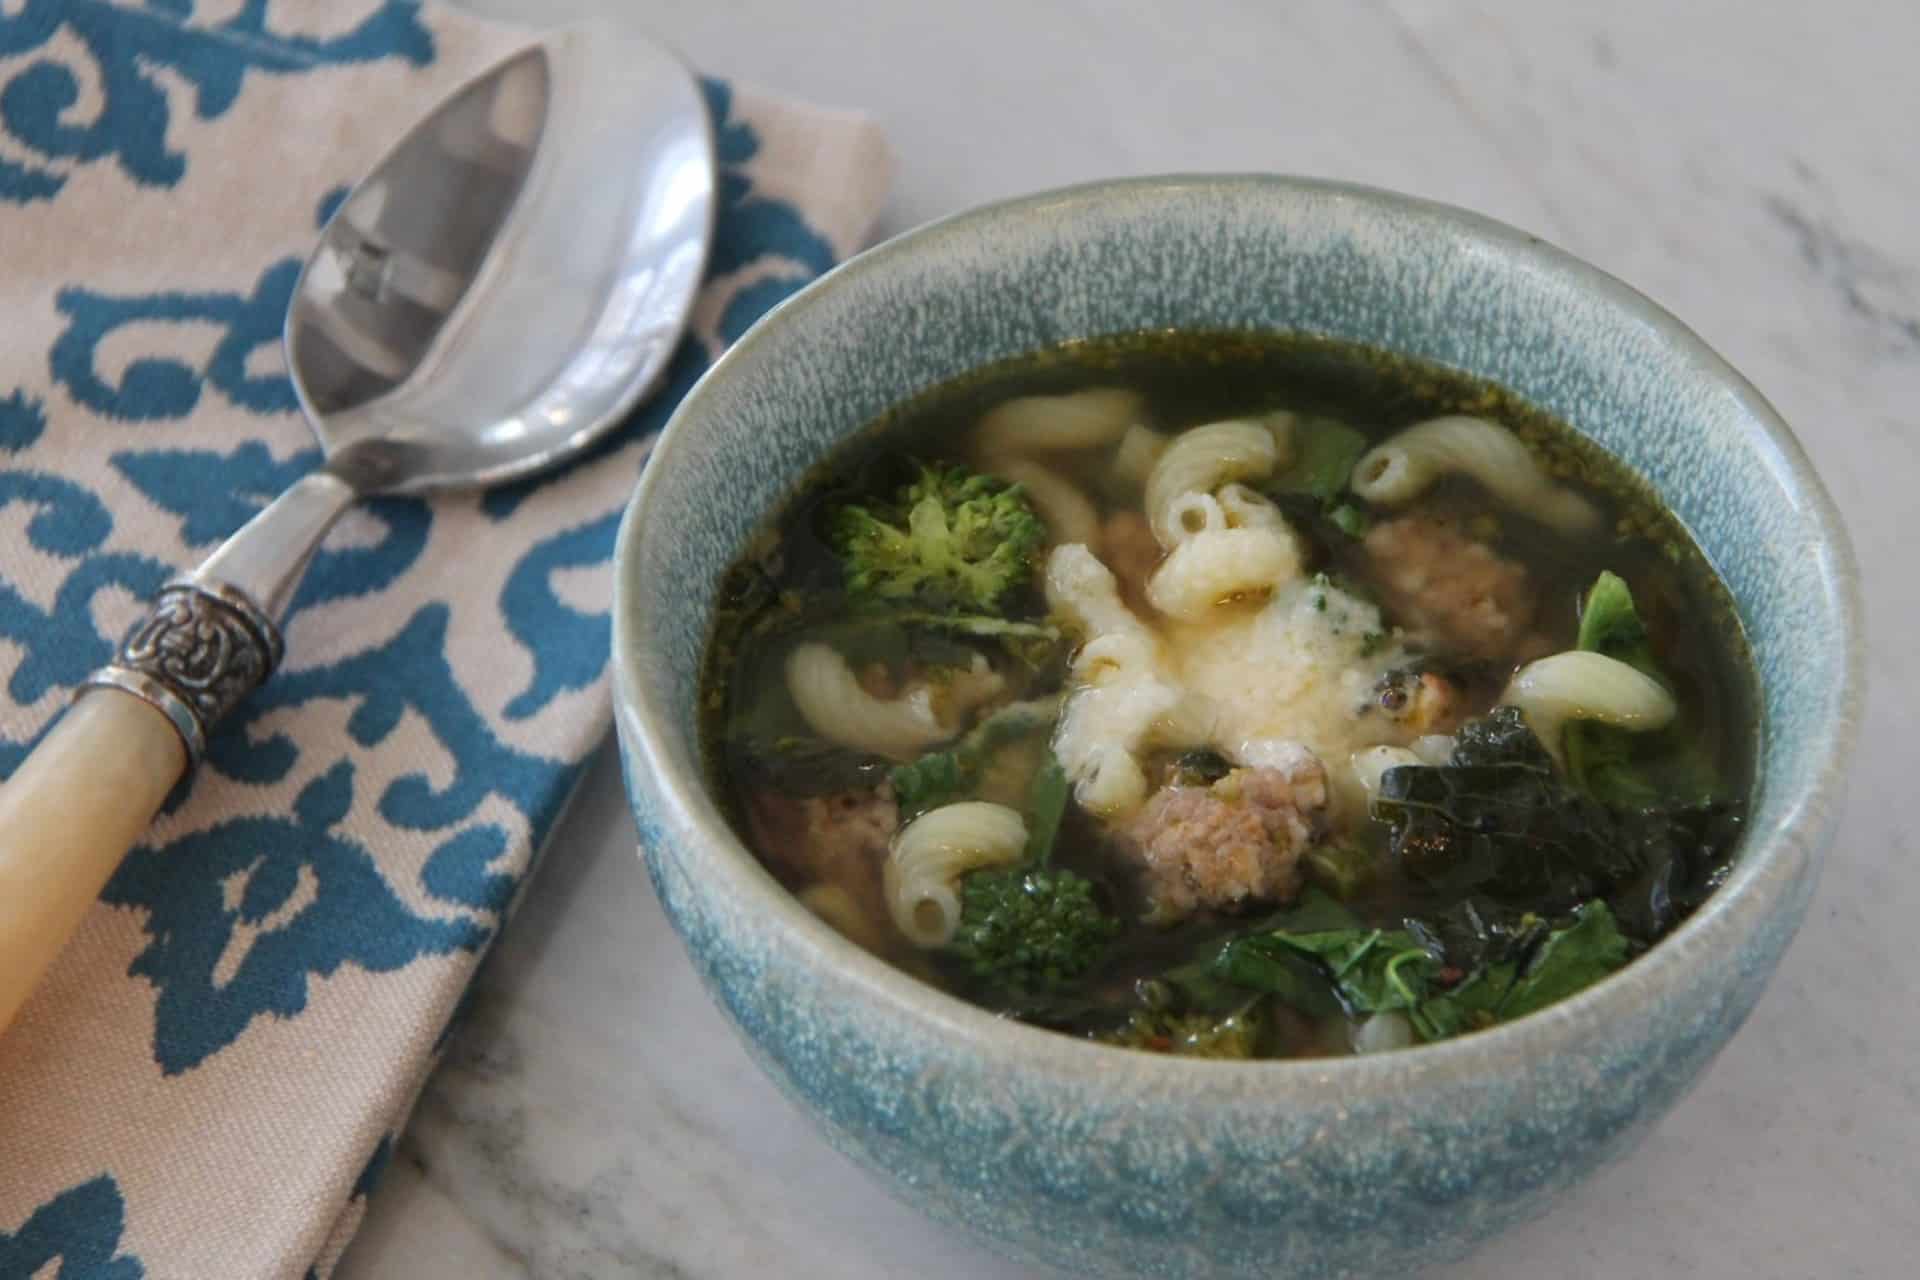 bowl of brothy soup studded with sausage crumbles, elbow pasta and broccoli